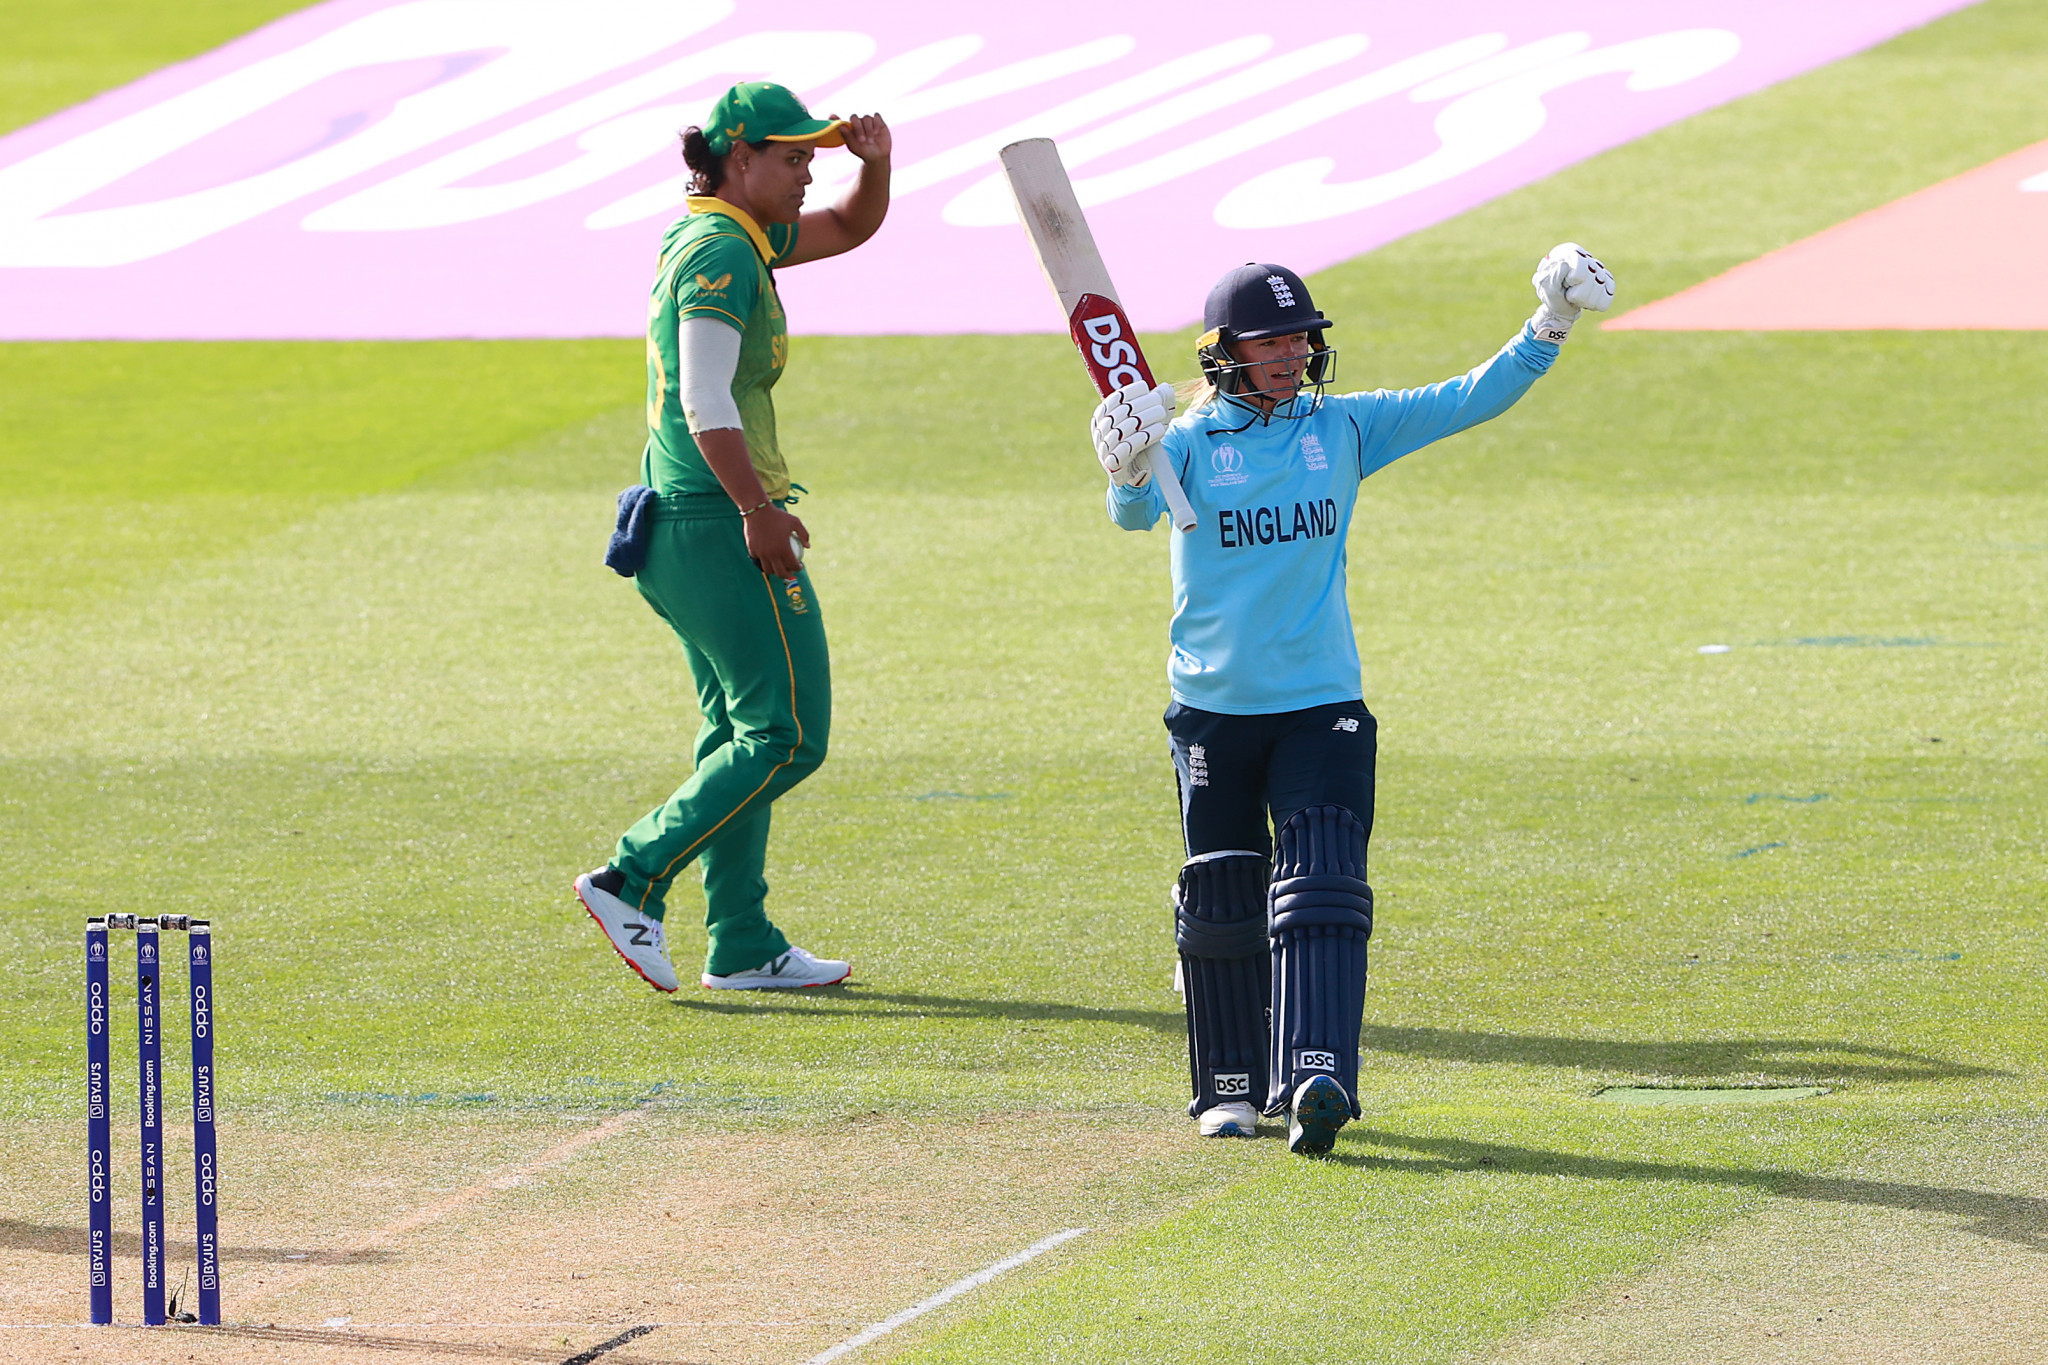 England to play Australia in Women’s Cricket World Cup final after thumping victory over South Africa